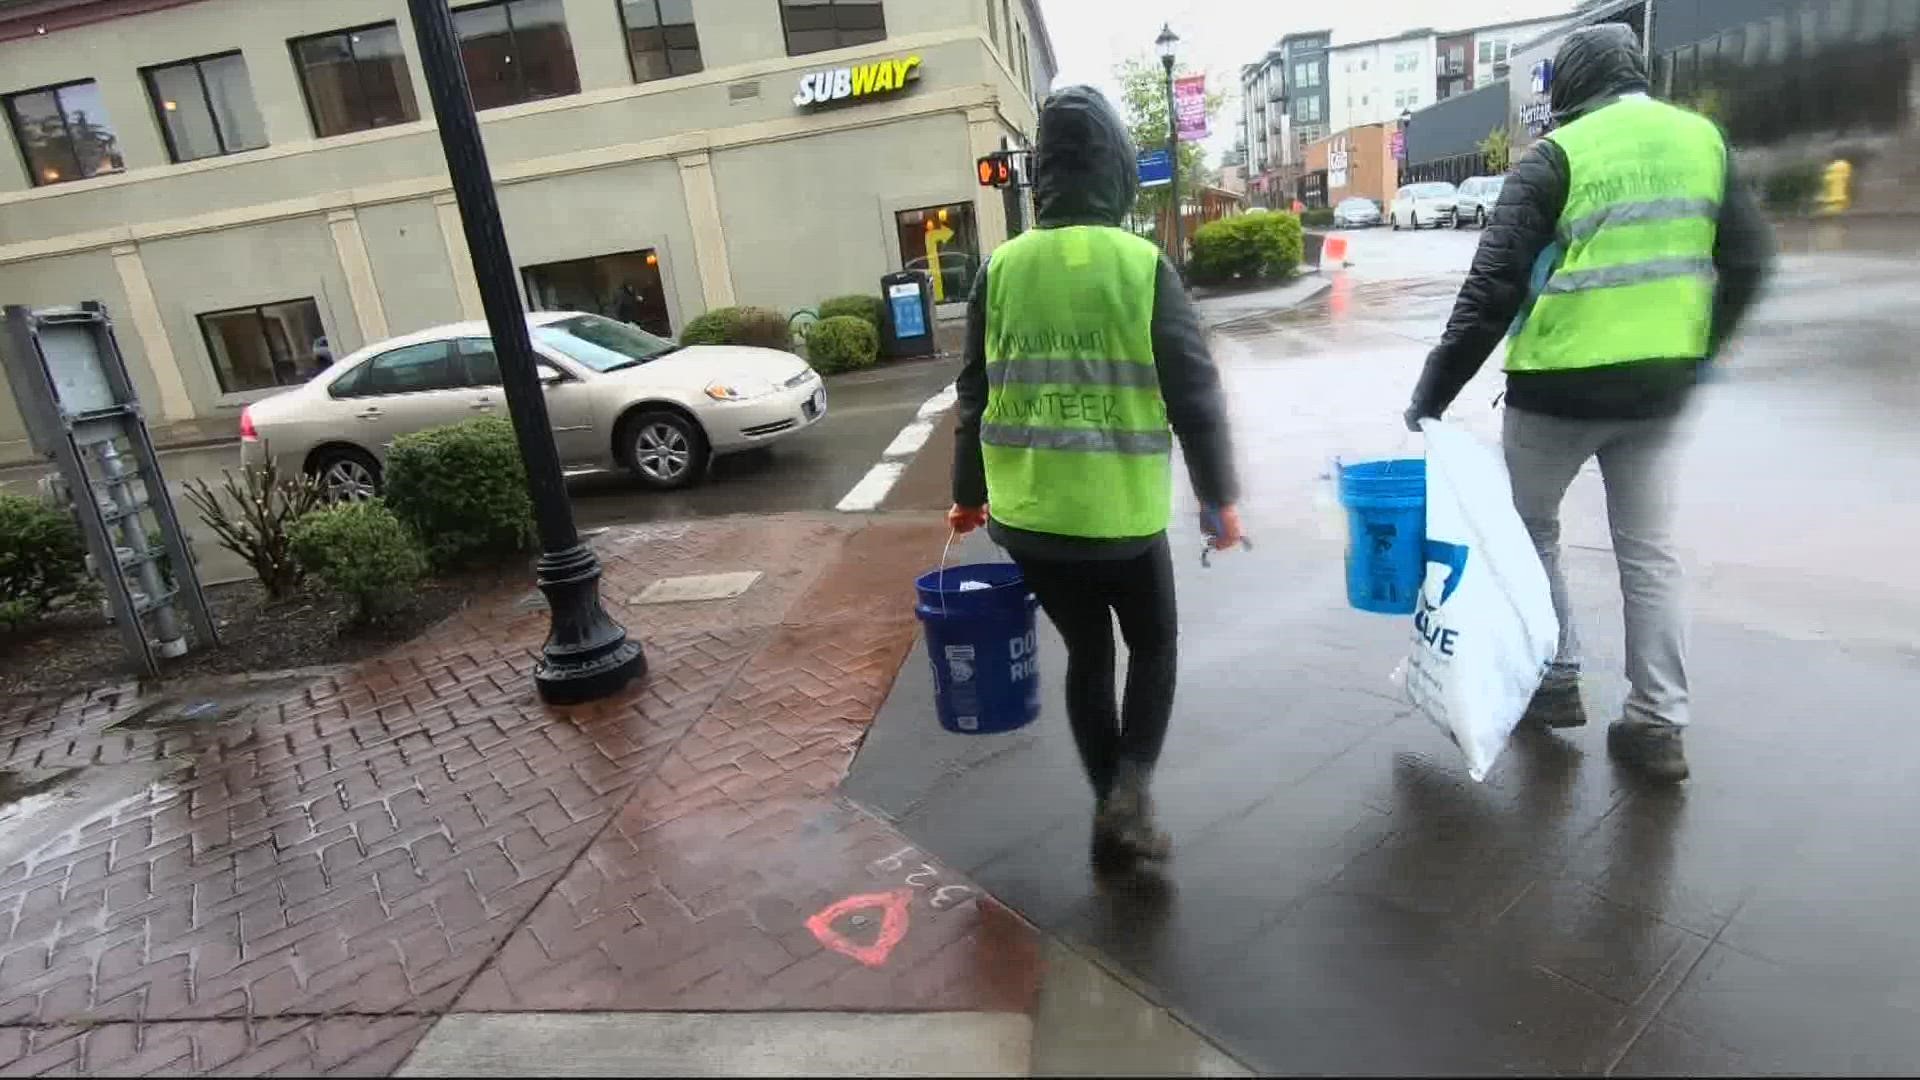 Volunteers with the nonprofit, SOLVE, organize regular cleanup events around Oregon including a recent one in Hillsboro. Photojournalist Steven Redlin tagged along.